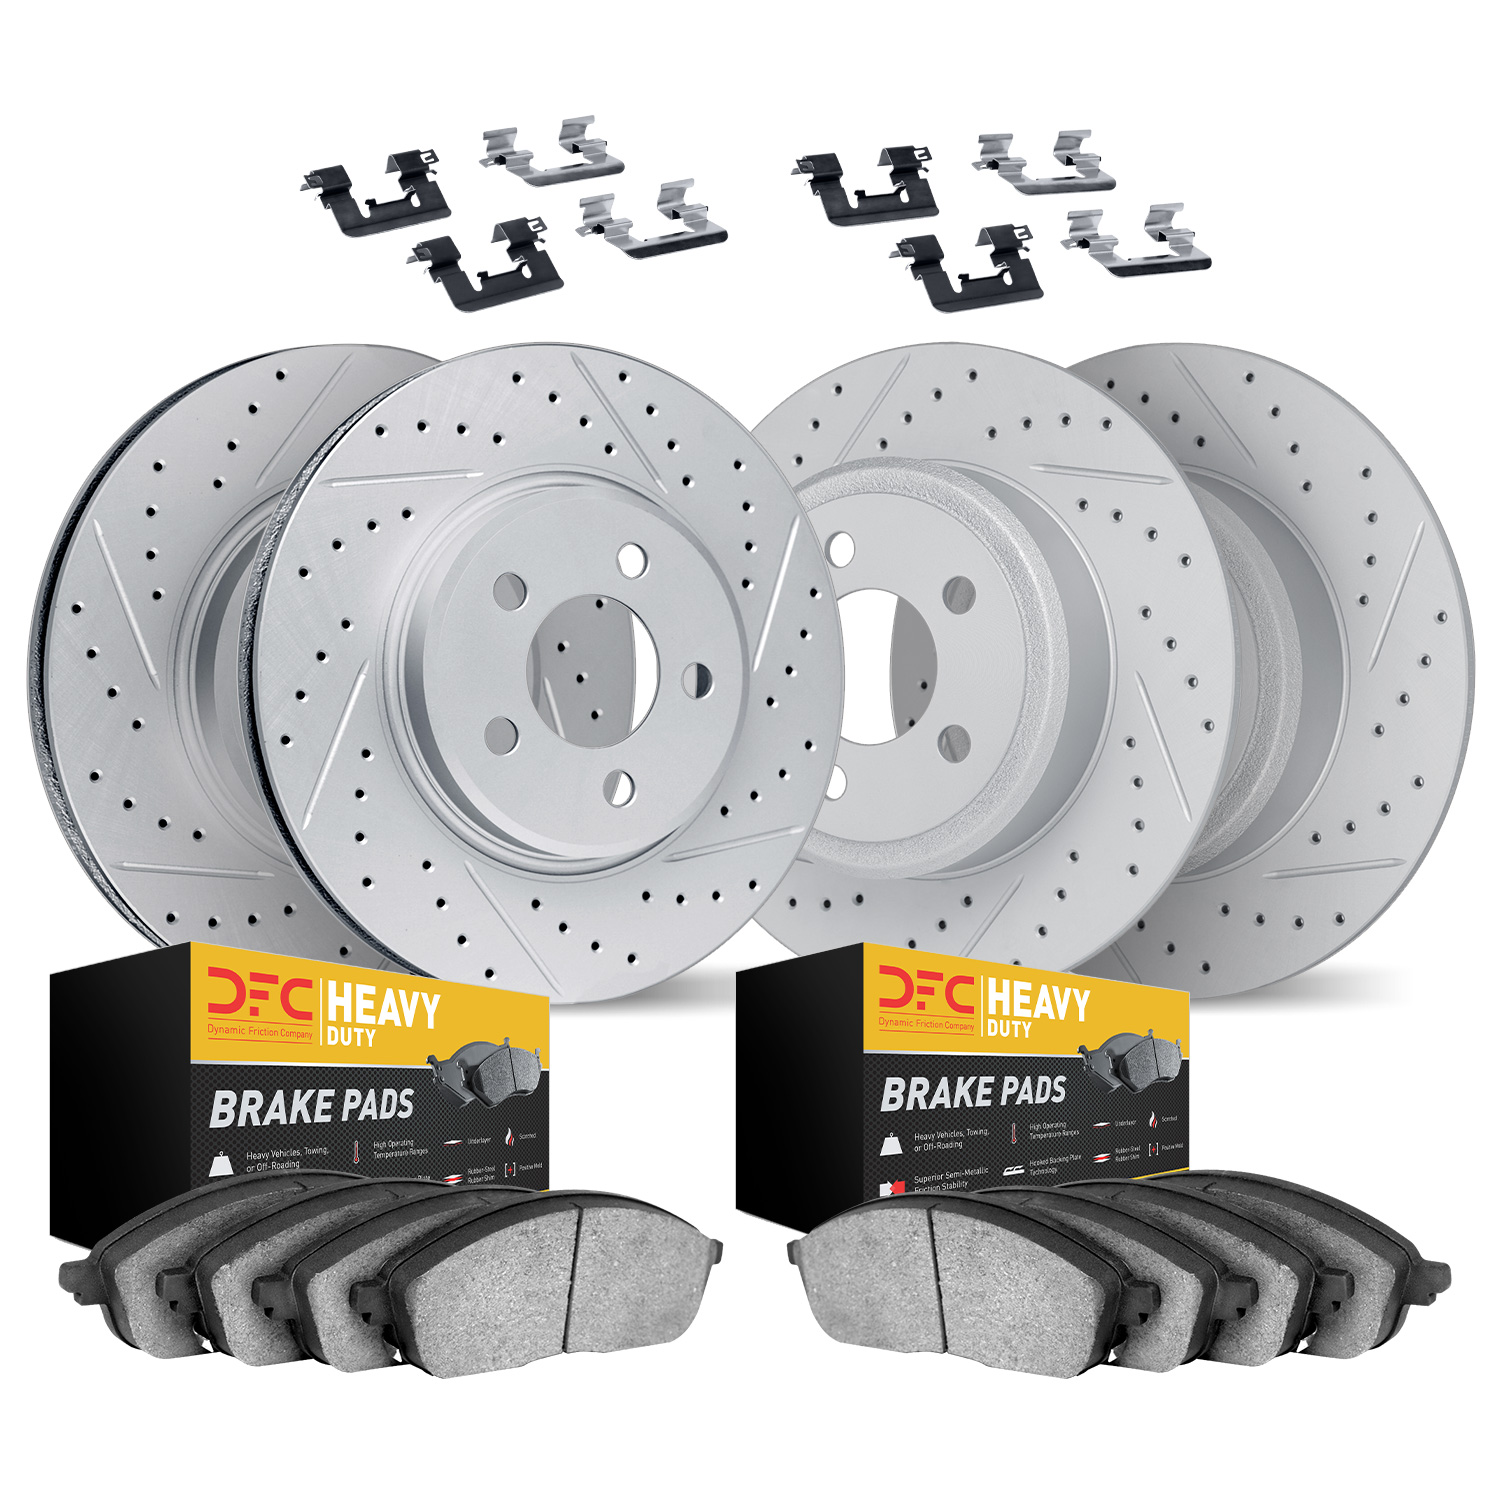 2214-99106 Geoperformance Drilled/Slotted Rotors w/Heavy-Duty Pads Kit & Hardware, 2020-2020 Ford/Lincoln/Mercury/Mazda, Positio